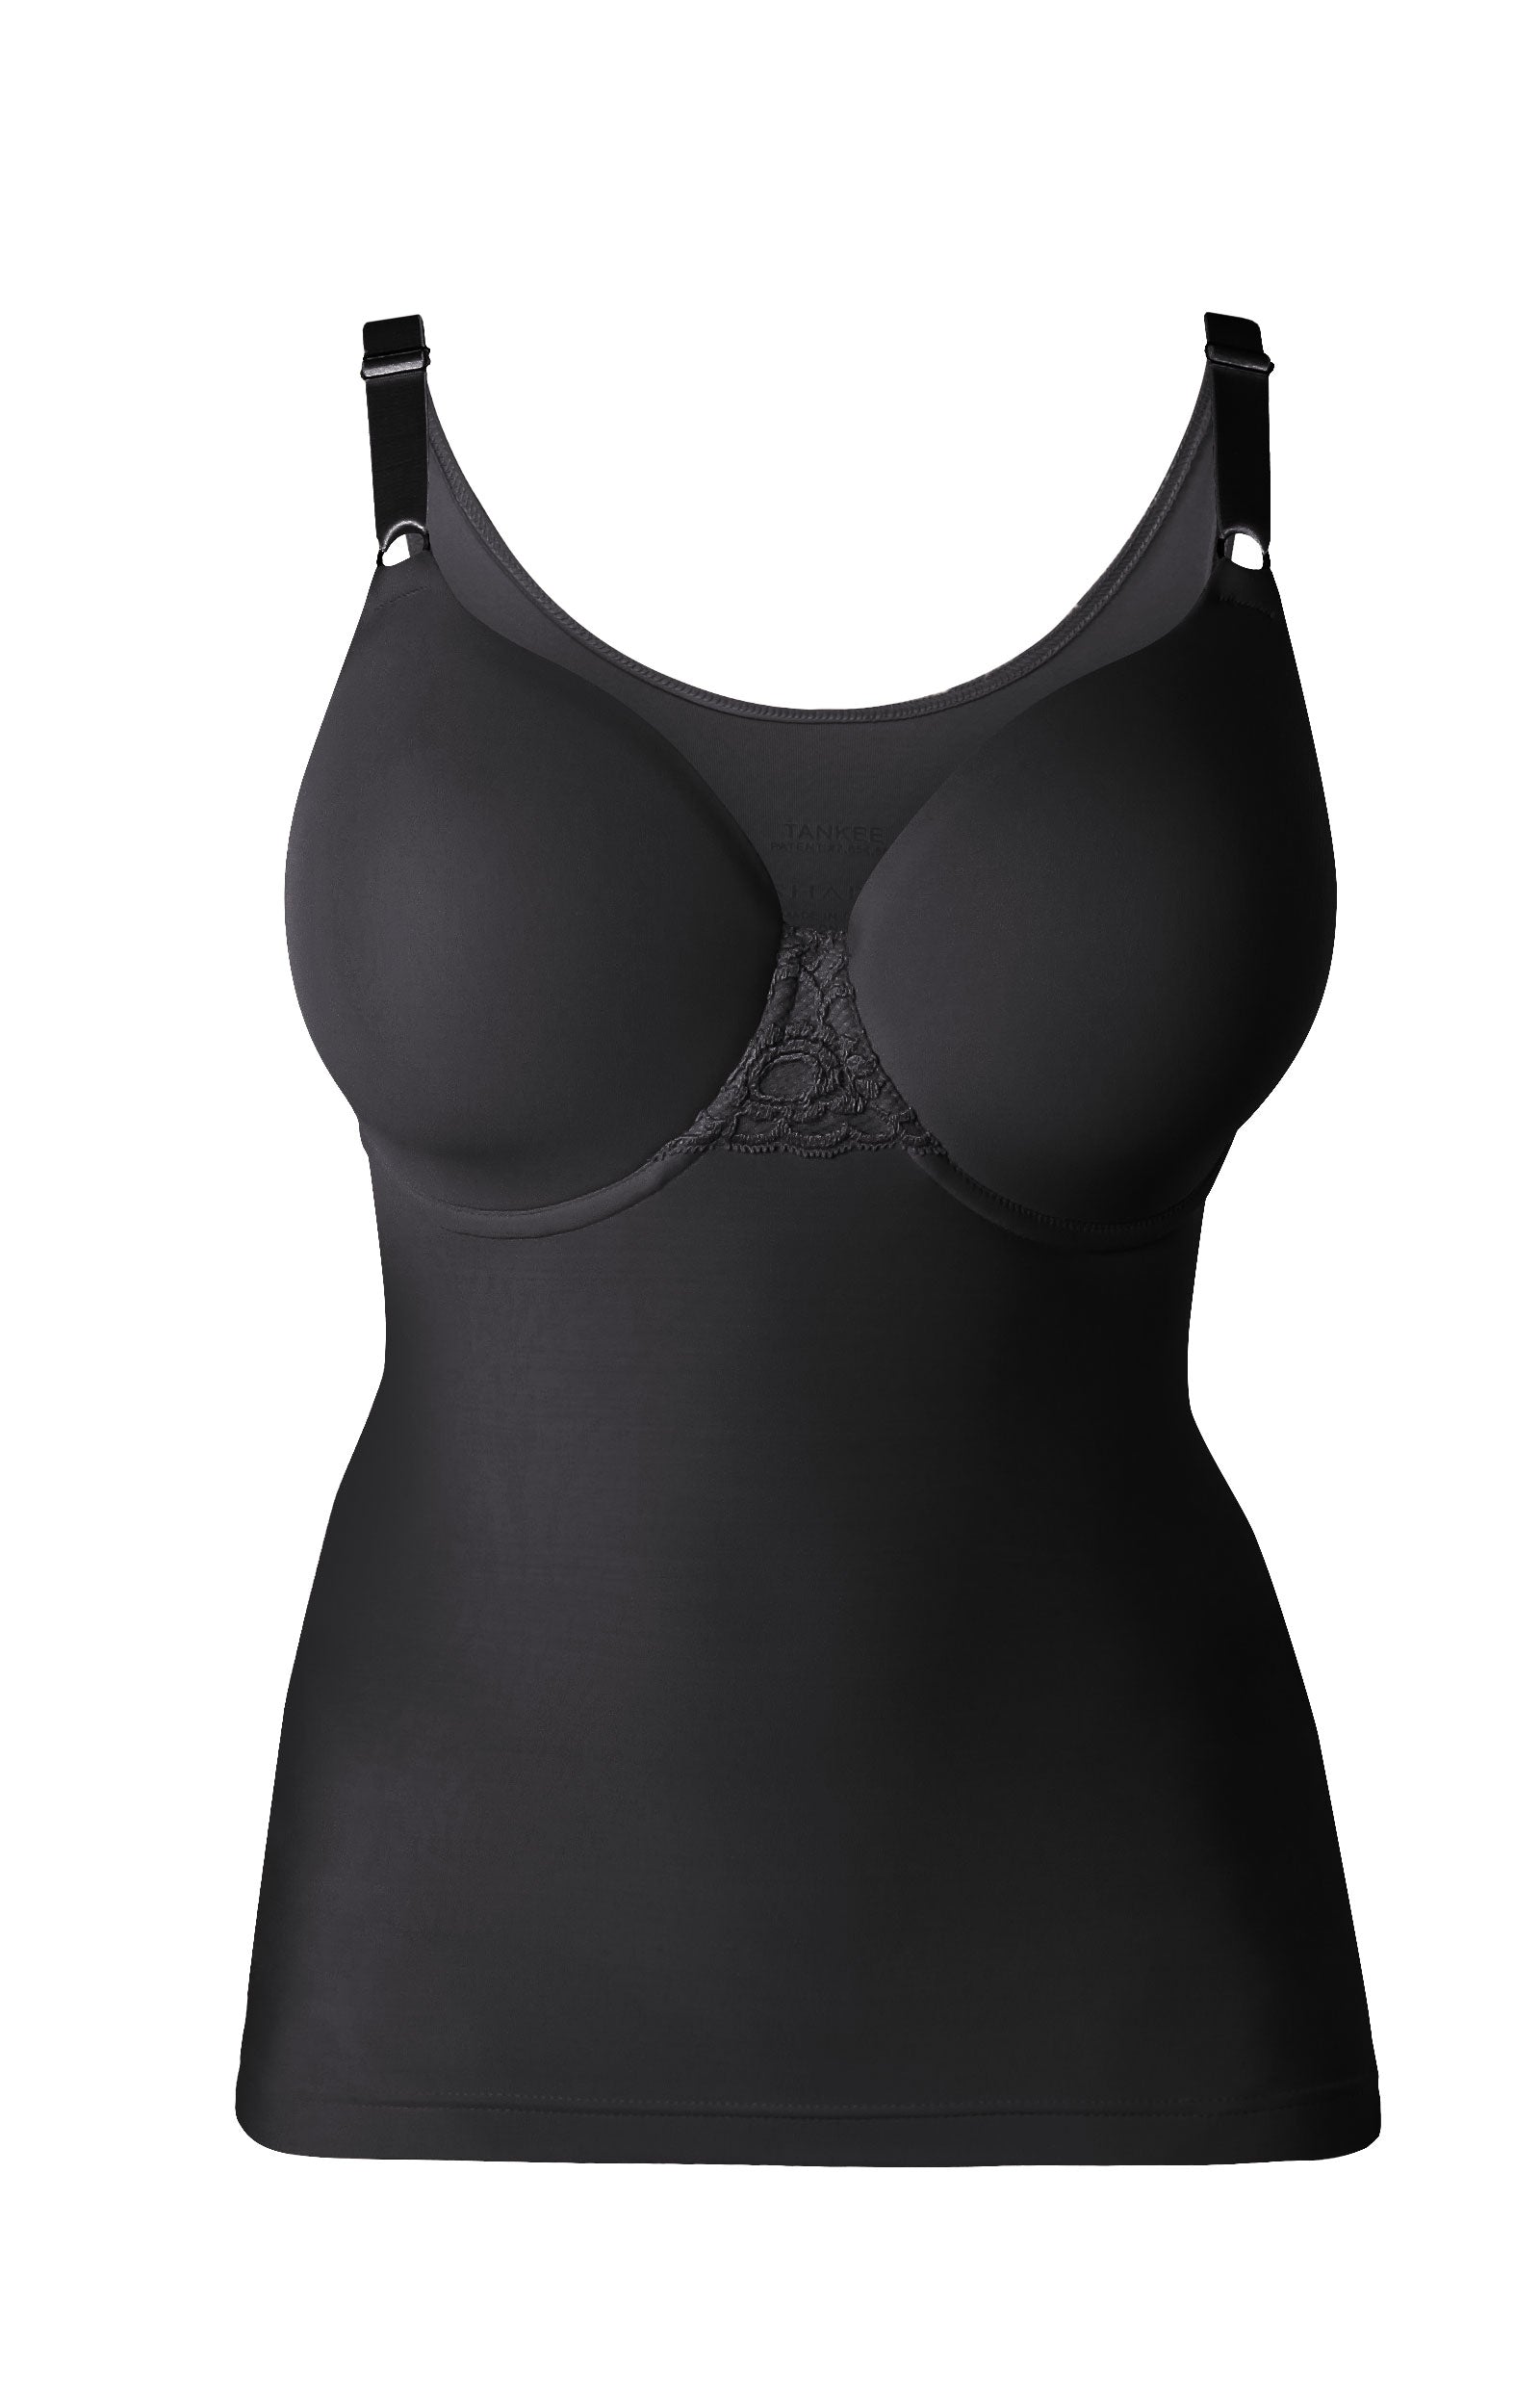 ELEG & STILANCE Women's Shaping Camisole with Bra Shape - Seamless,  Stretchy, and Soft.